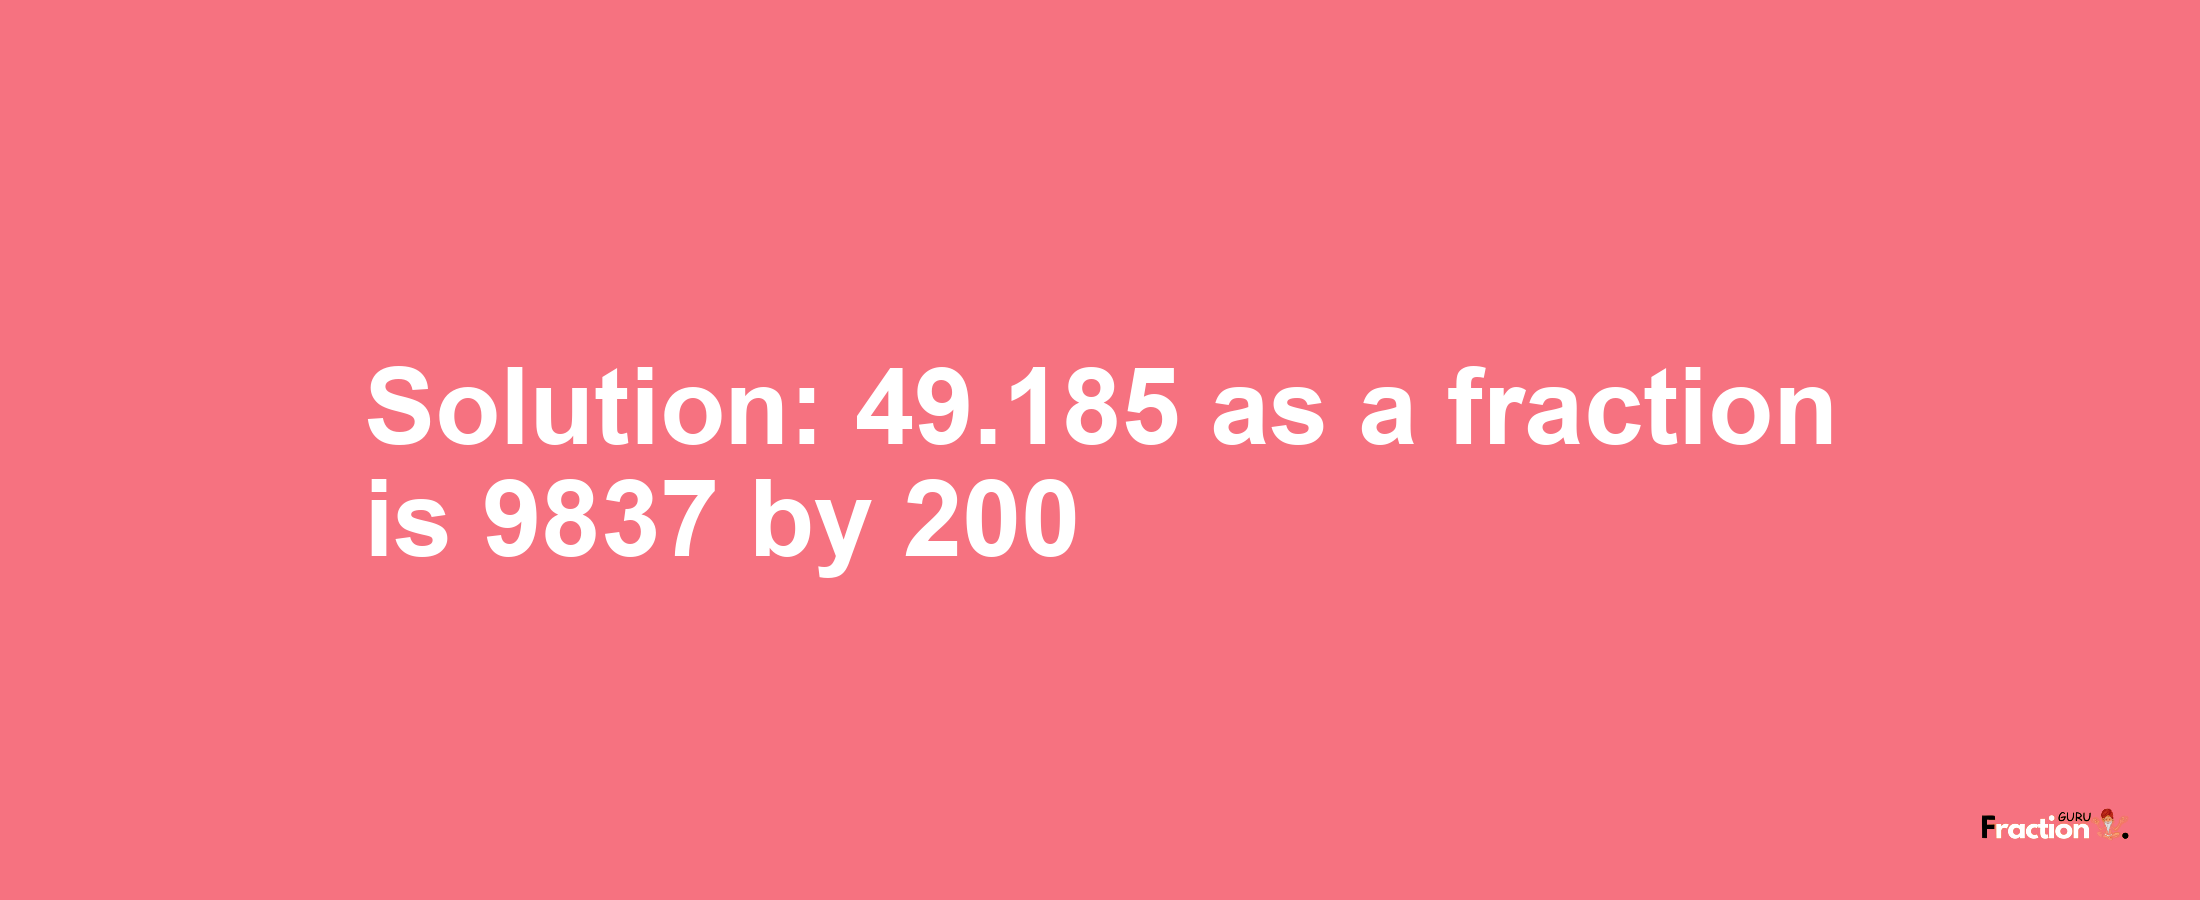 Solution:49.185 as a fraction is 9837/200